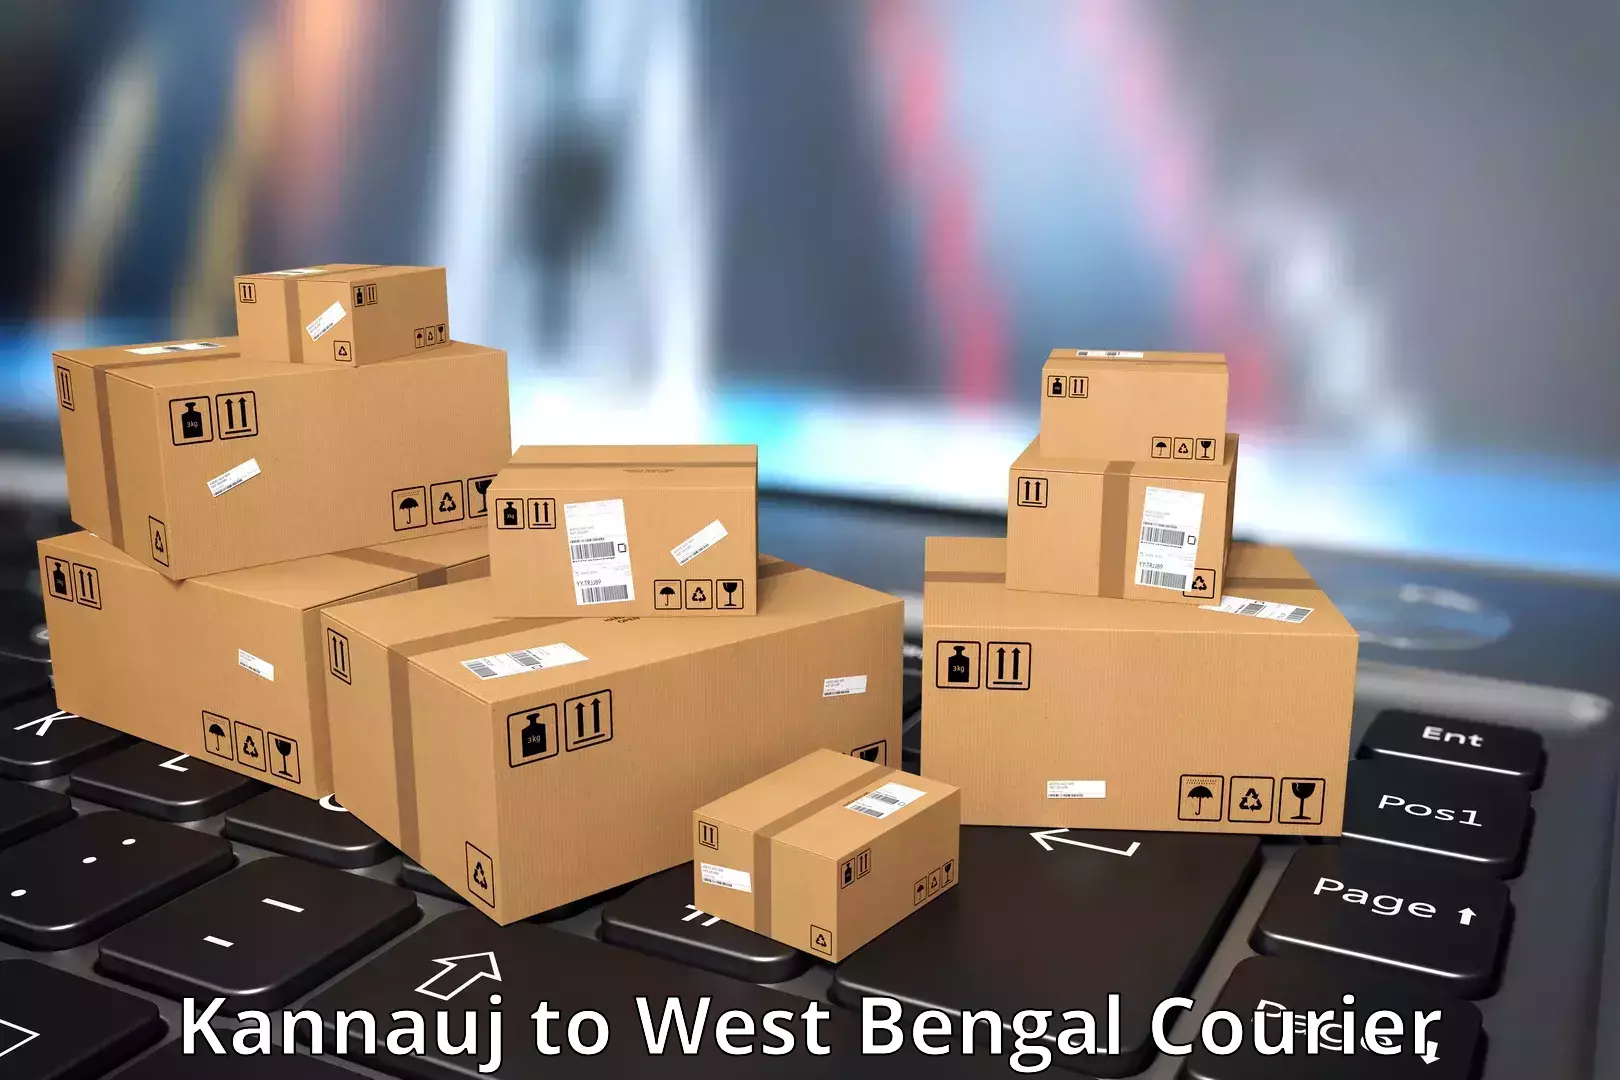 Courier service booking Kannauj to West Bengal